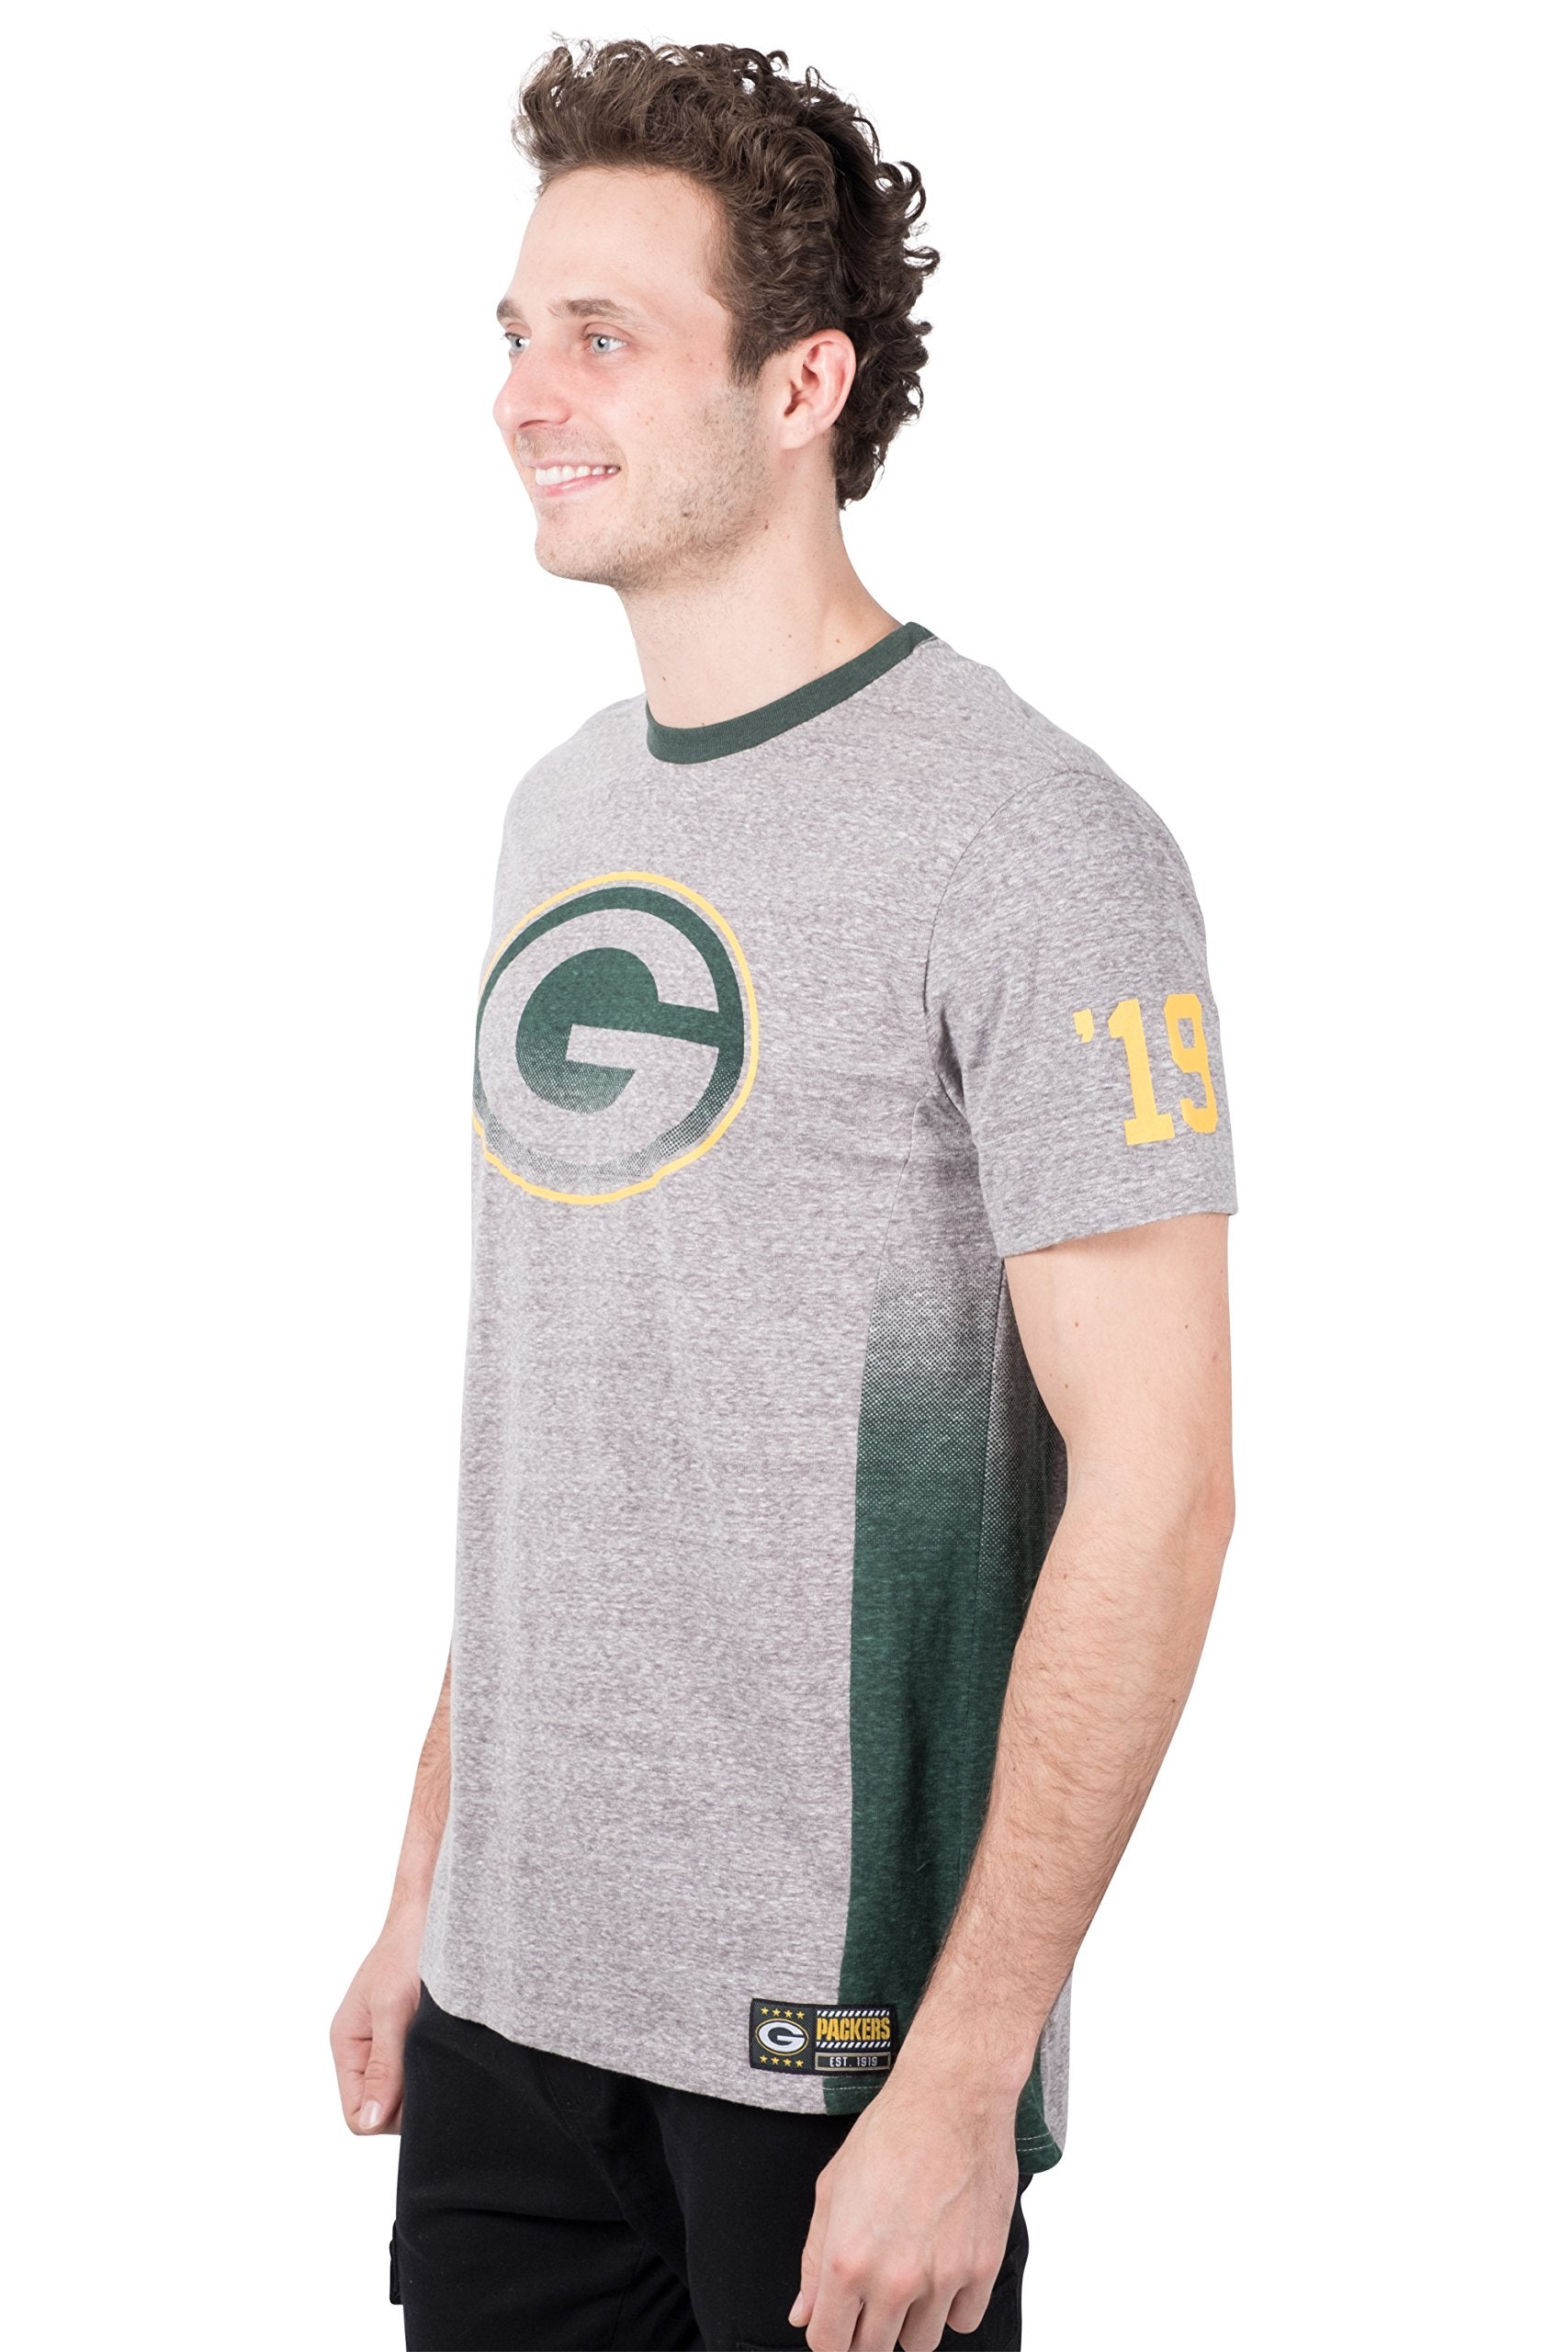 Ultra Game NFL Green Bay Packers Mens Vintage Ringer Short Sleeve Tee Shirt|Green Bay Packers